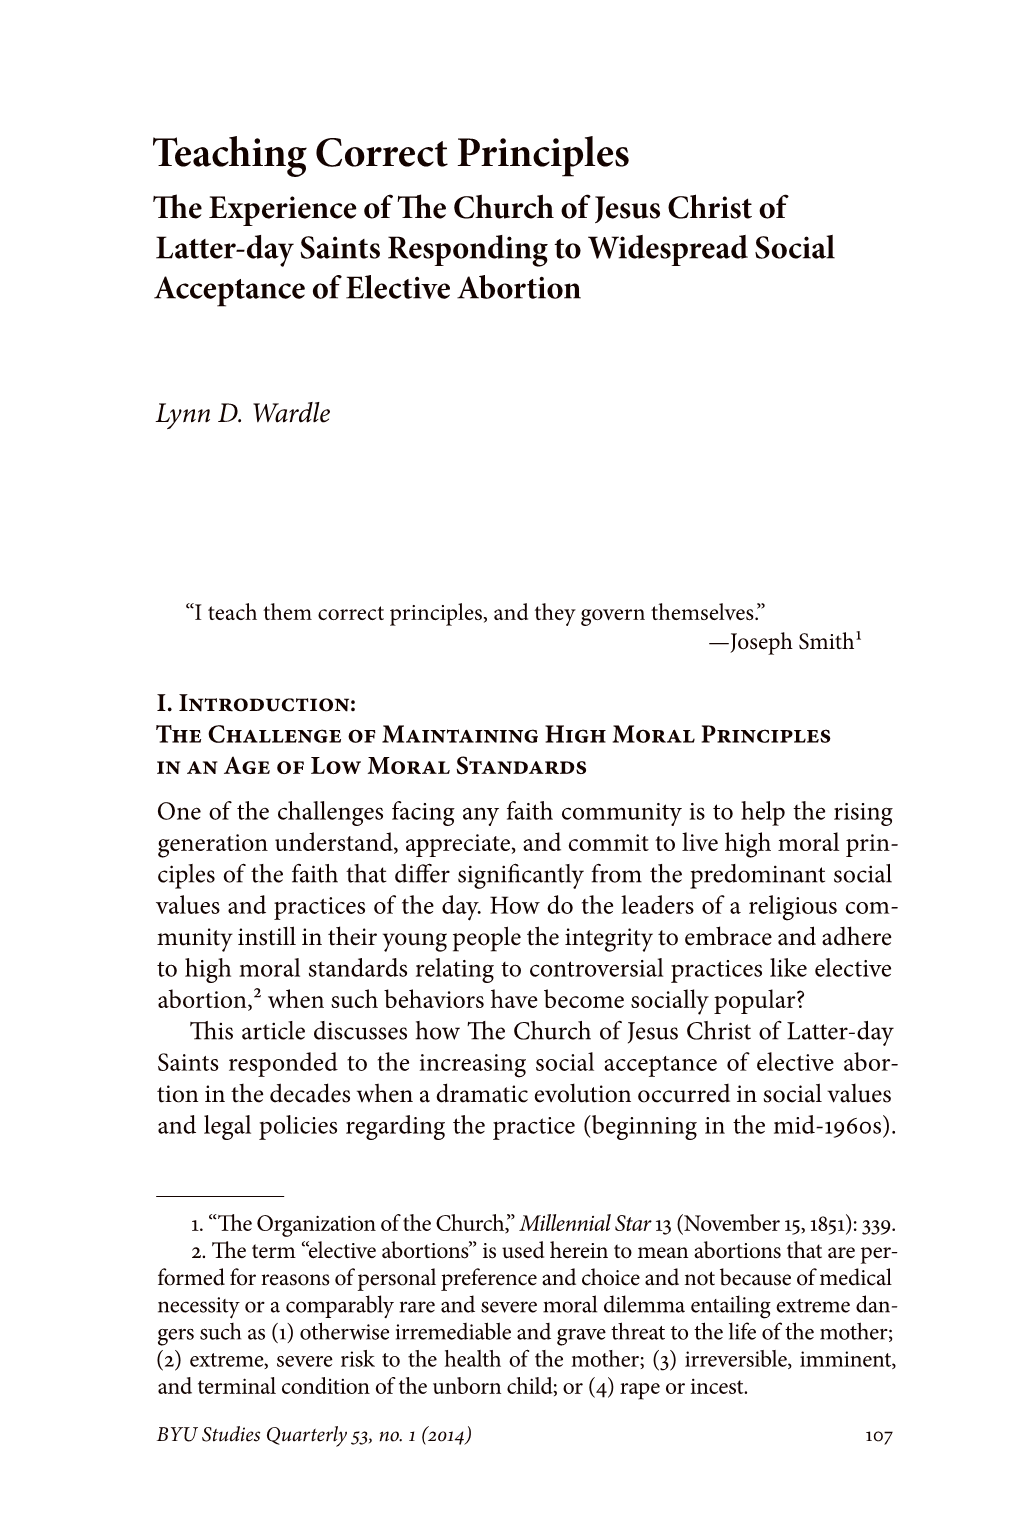 Teaching Correct Principles the Experience of the Church of Jesus Christ of Latter-Day Saints Responding to Widespread Social Acceptance of Elective Abortion